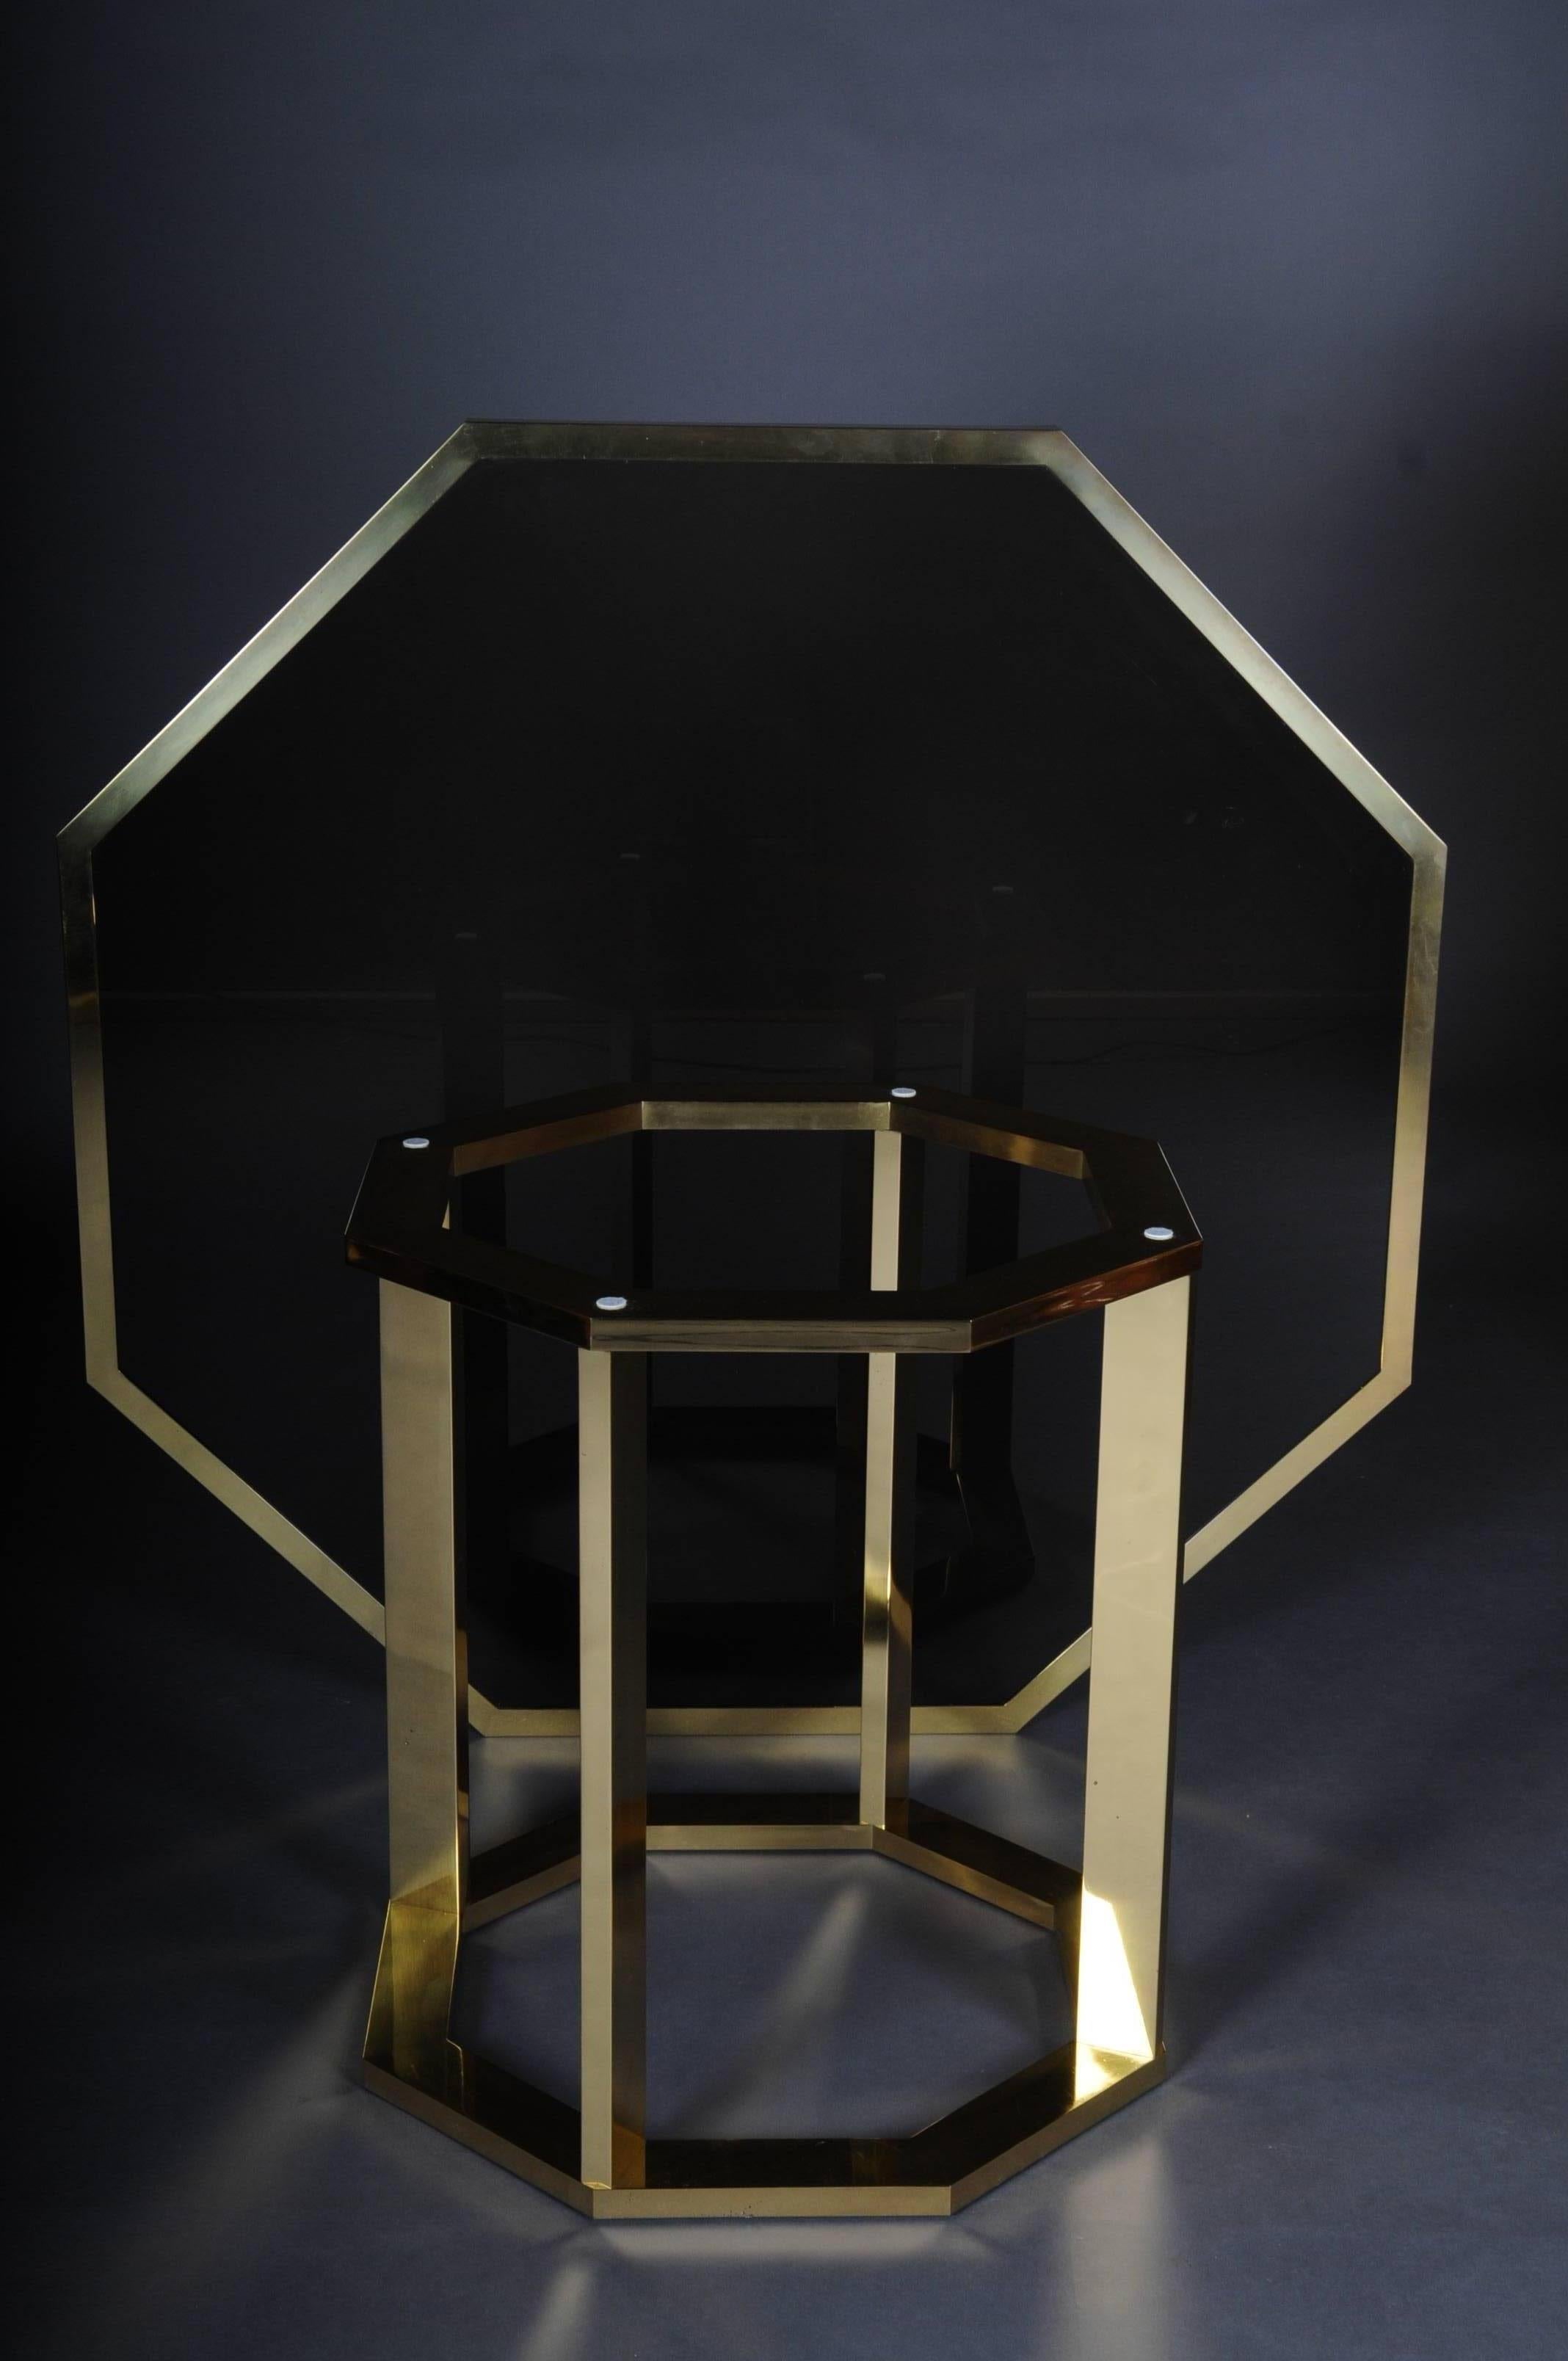 Frame and cover plate are finished in highly polished brass. Octagonal top plate with tinted glass. Extremely decorative and guaranteed a real eye-catcher. Very heavy and high quality work.